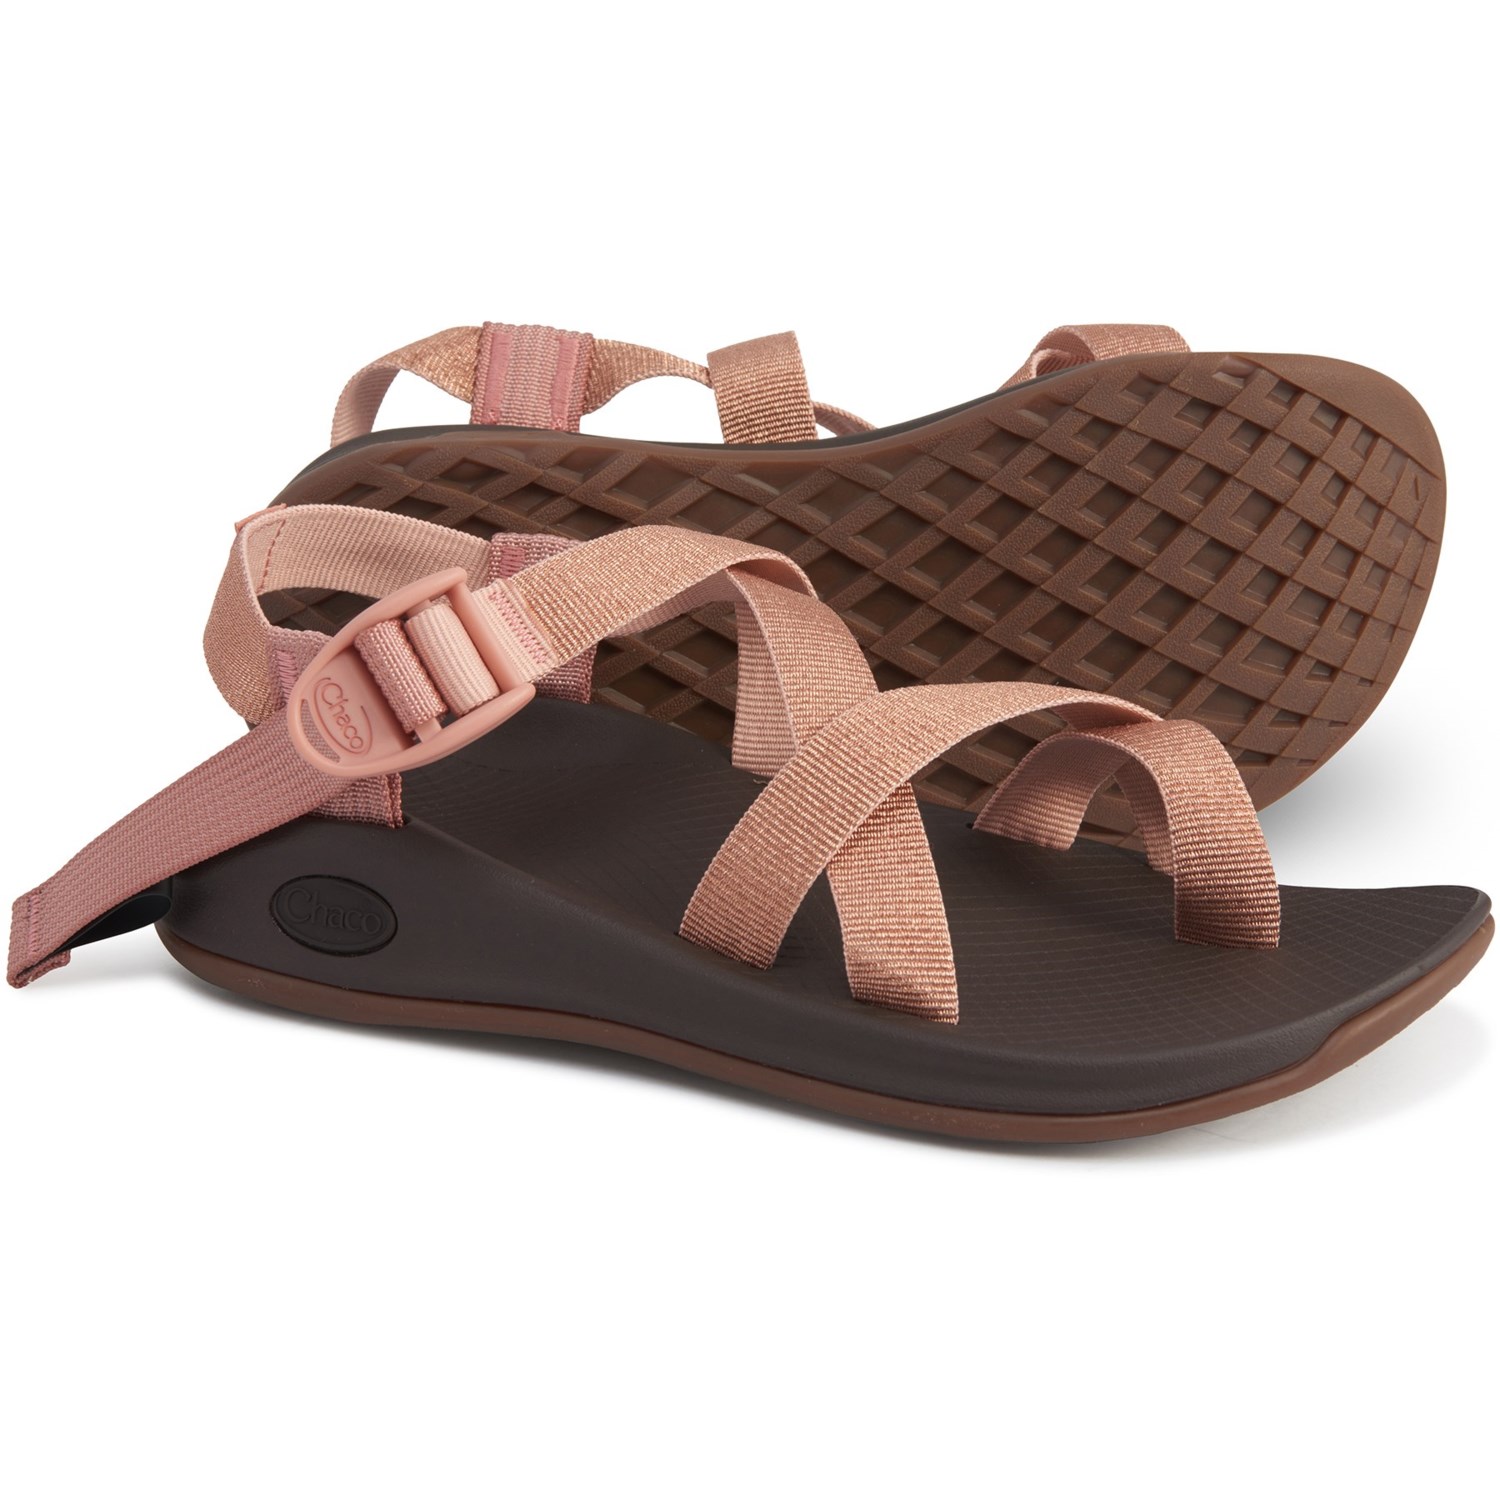 rose gold chacos buy clothes shoes online